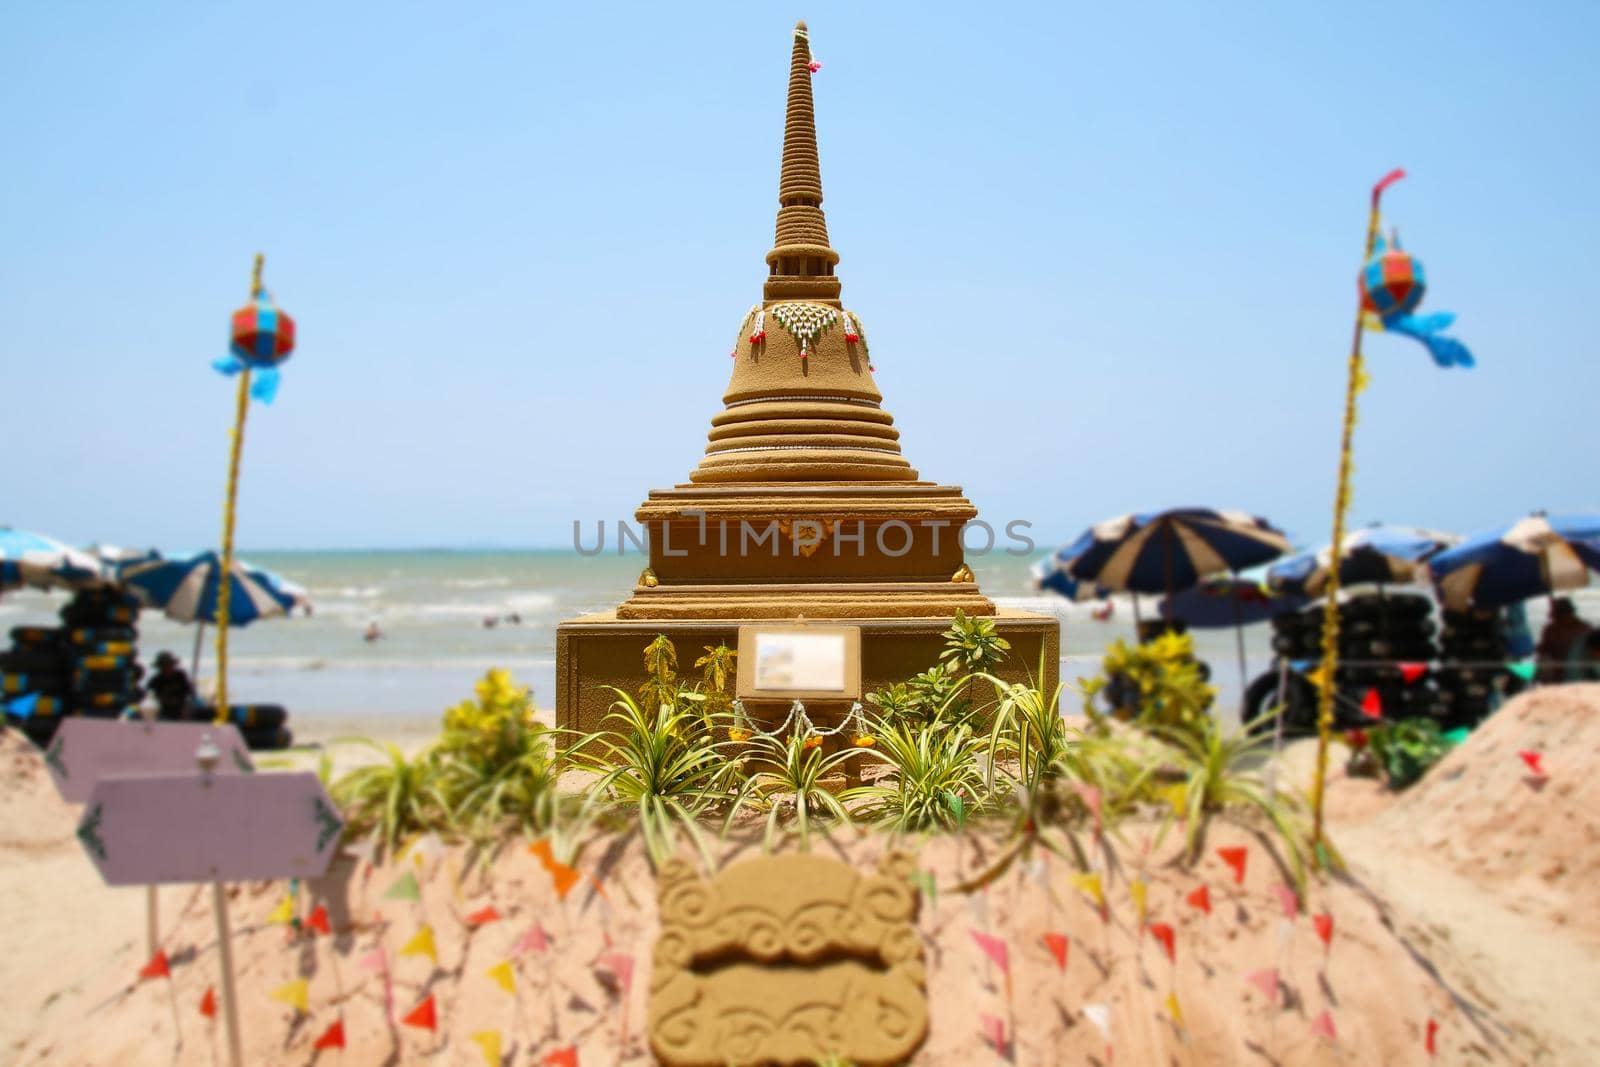 sand pagoda was built, and beautifully decorated in Songkran festival by Darkfox